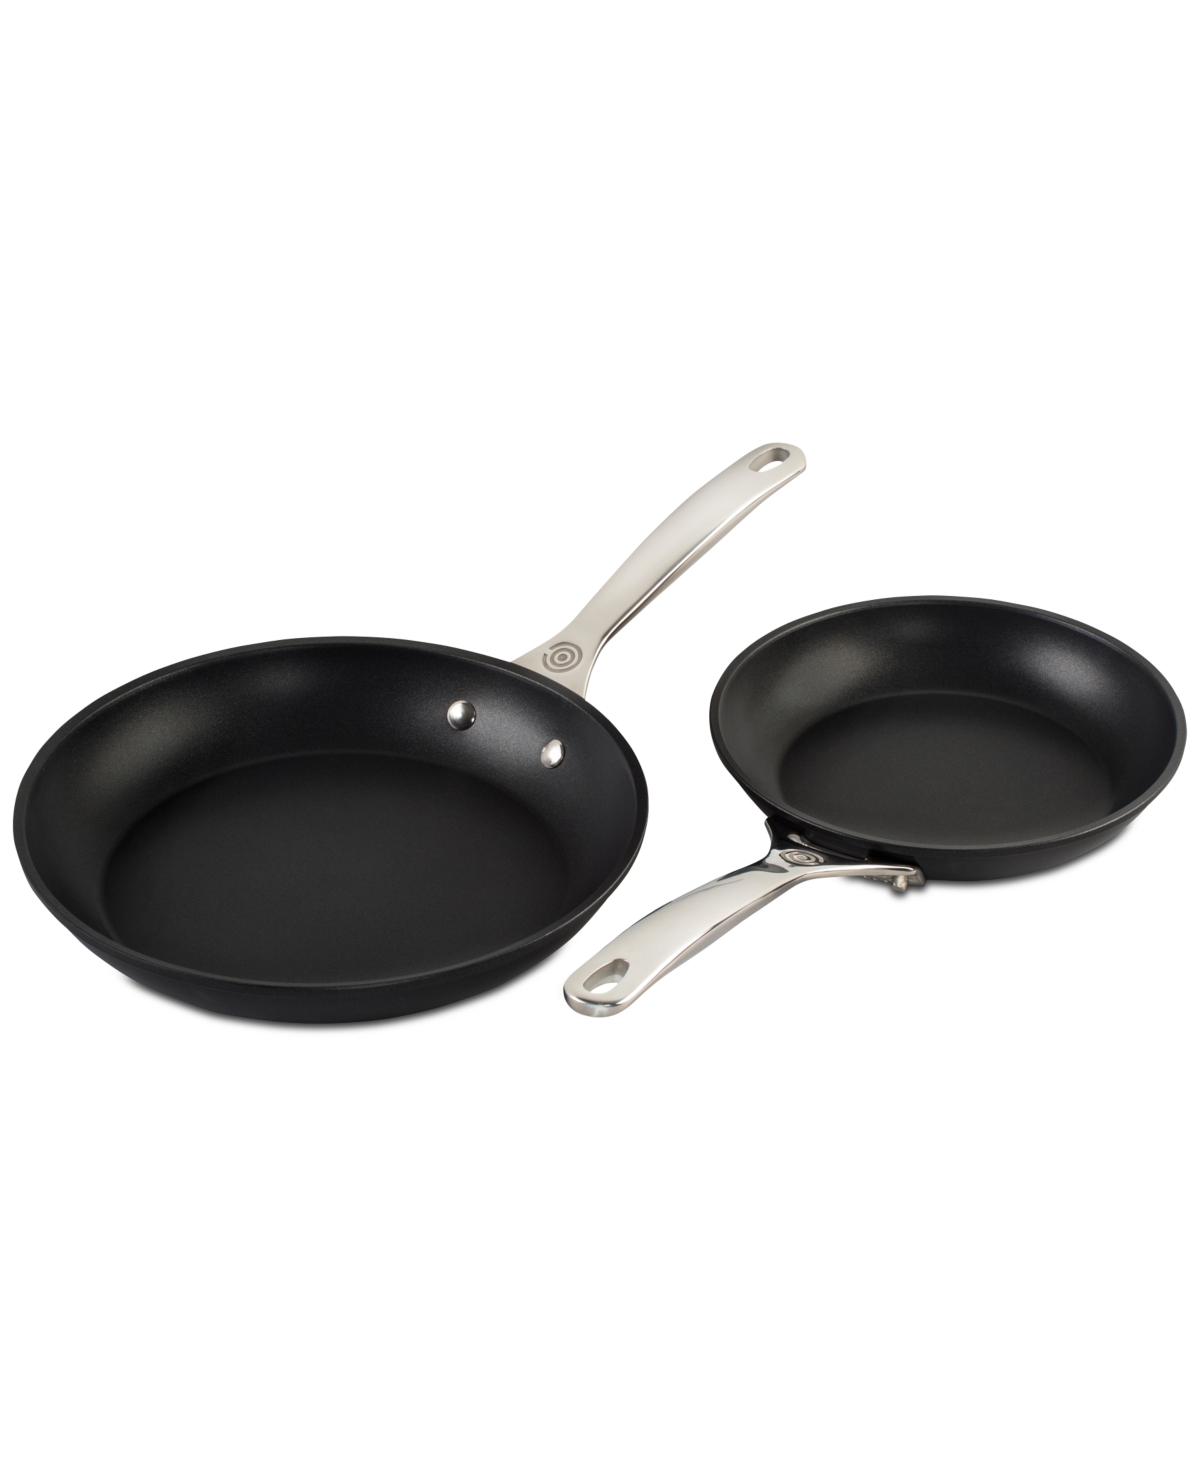 Le Creuset 2-pc. Non-stick Fry Pan Set In Stainless Steel